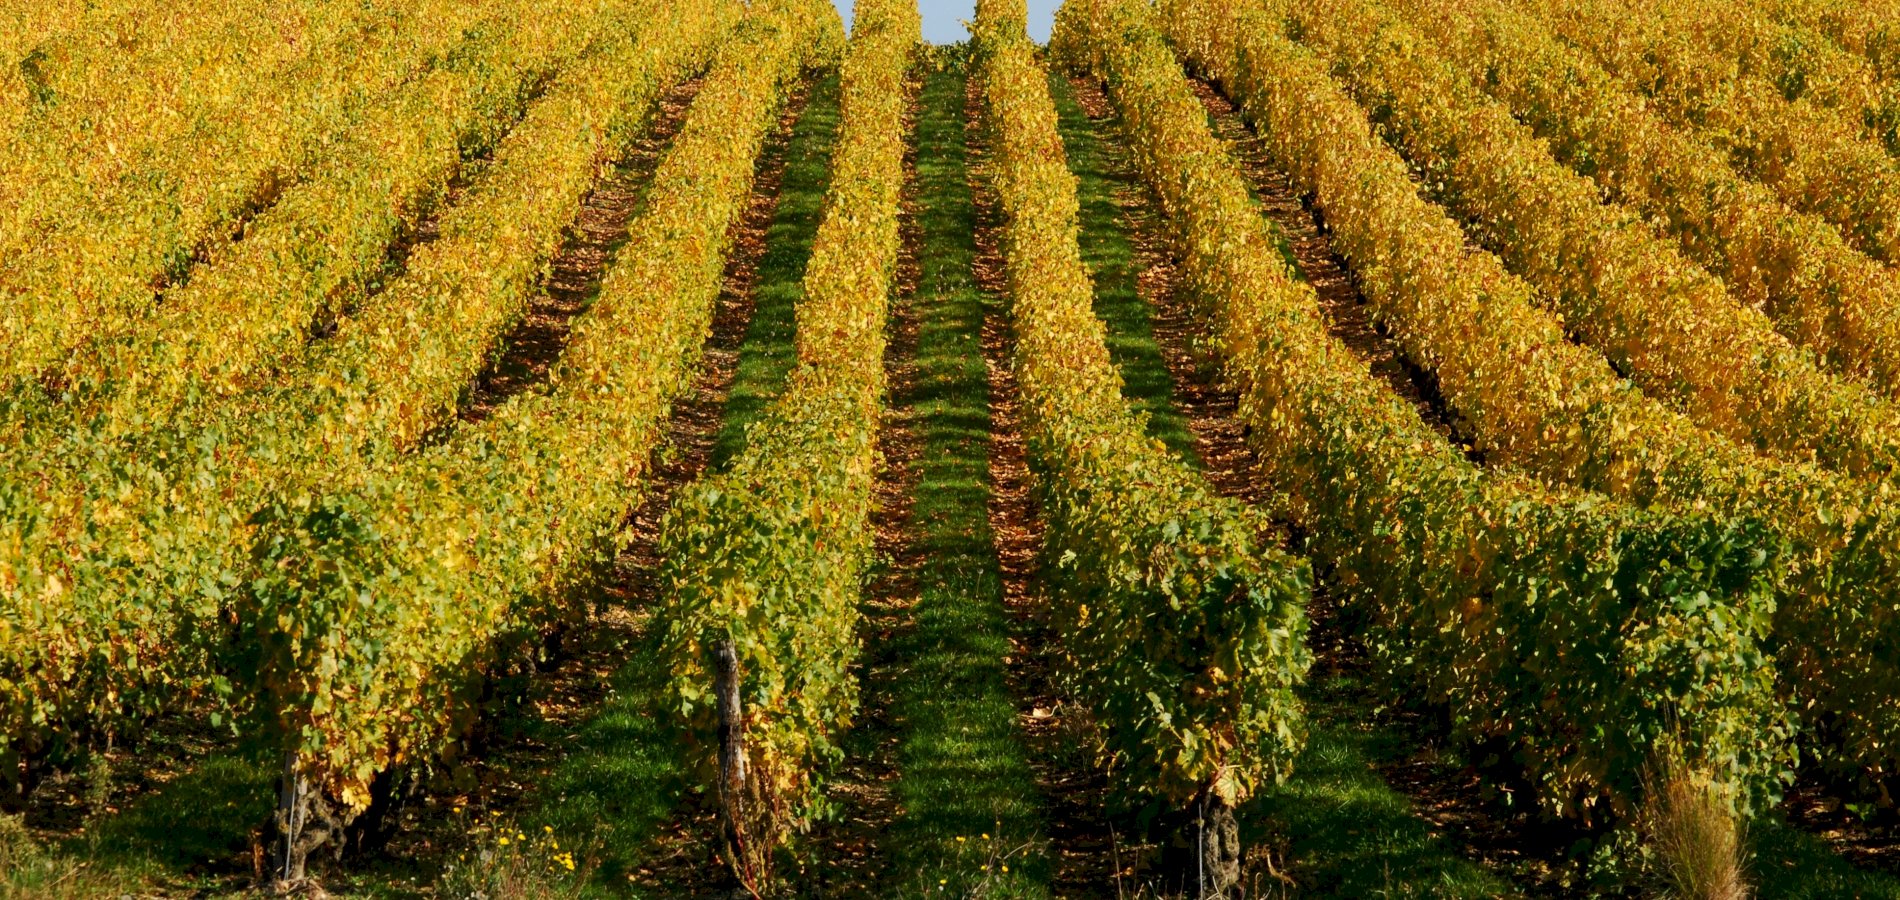 Ophorus Tours - Vouvray Wine Tour half day trip from Tours